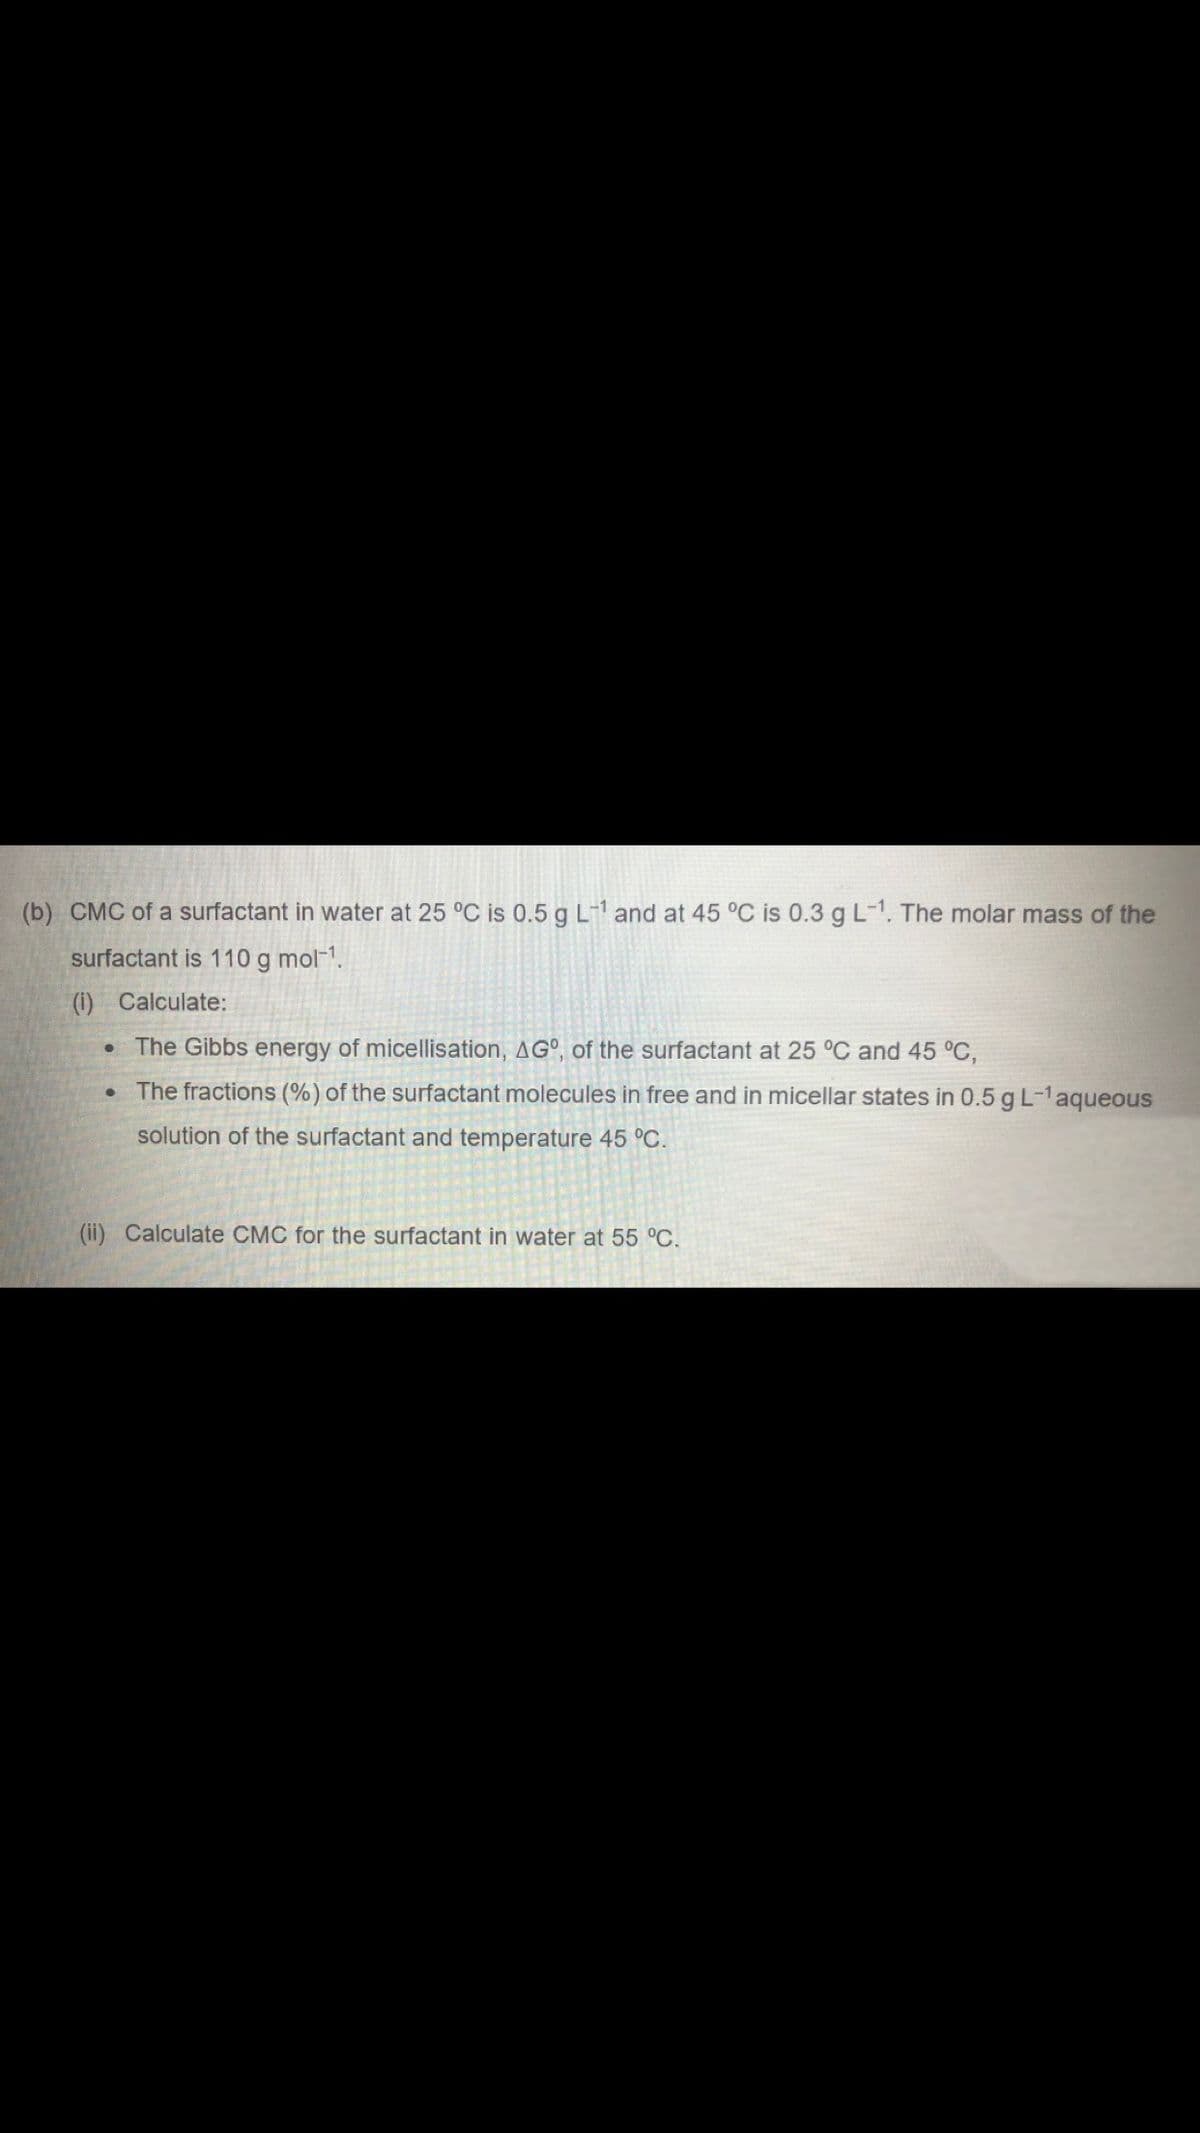 (b) CMC of a surfactant in water at 25 °C is 0.5 g L-¹ and at 45 °C is 0.3 g L-1. The molar mass of the
surfactant is 110 g mol-¹.
(i) Calculate:
The Gibbs energy of micellisation, AGO, of the surfactant at 25 °C and 45 °C,
The fractions (%) of the surfactant molecules in free and in micellar states in 0.5 g L-¹ aqueous
solution of the surfactant and temperature 45 °C.
●
●
(ii) Calculate CMC for the surfactant in water at 55 °C.